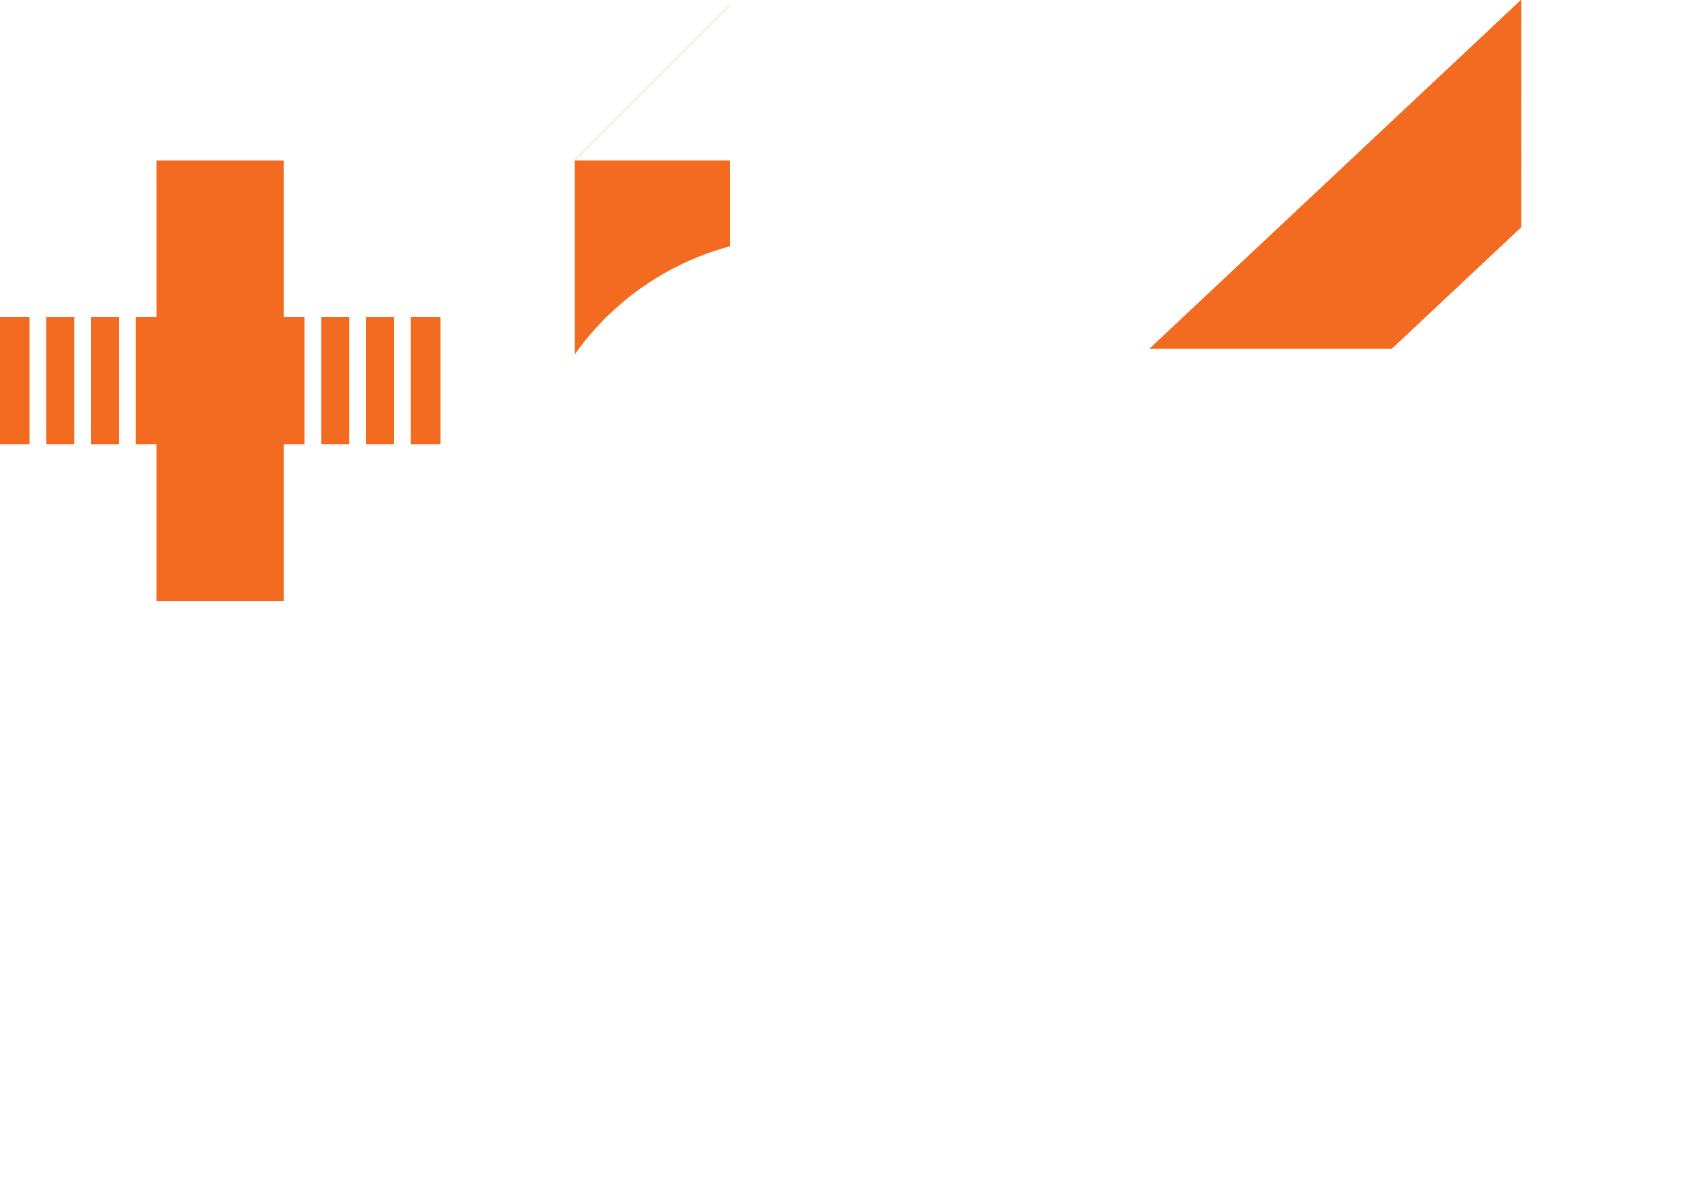 +54 Mobile Store